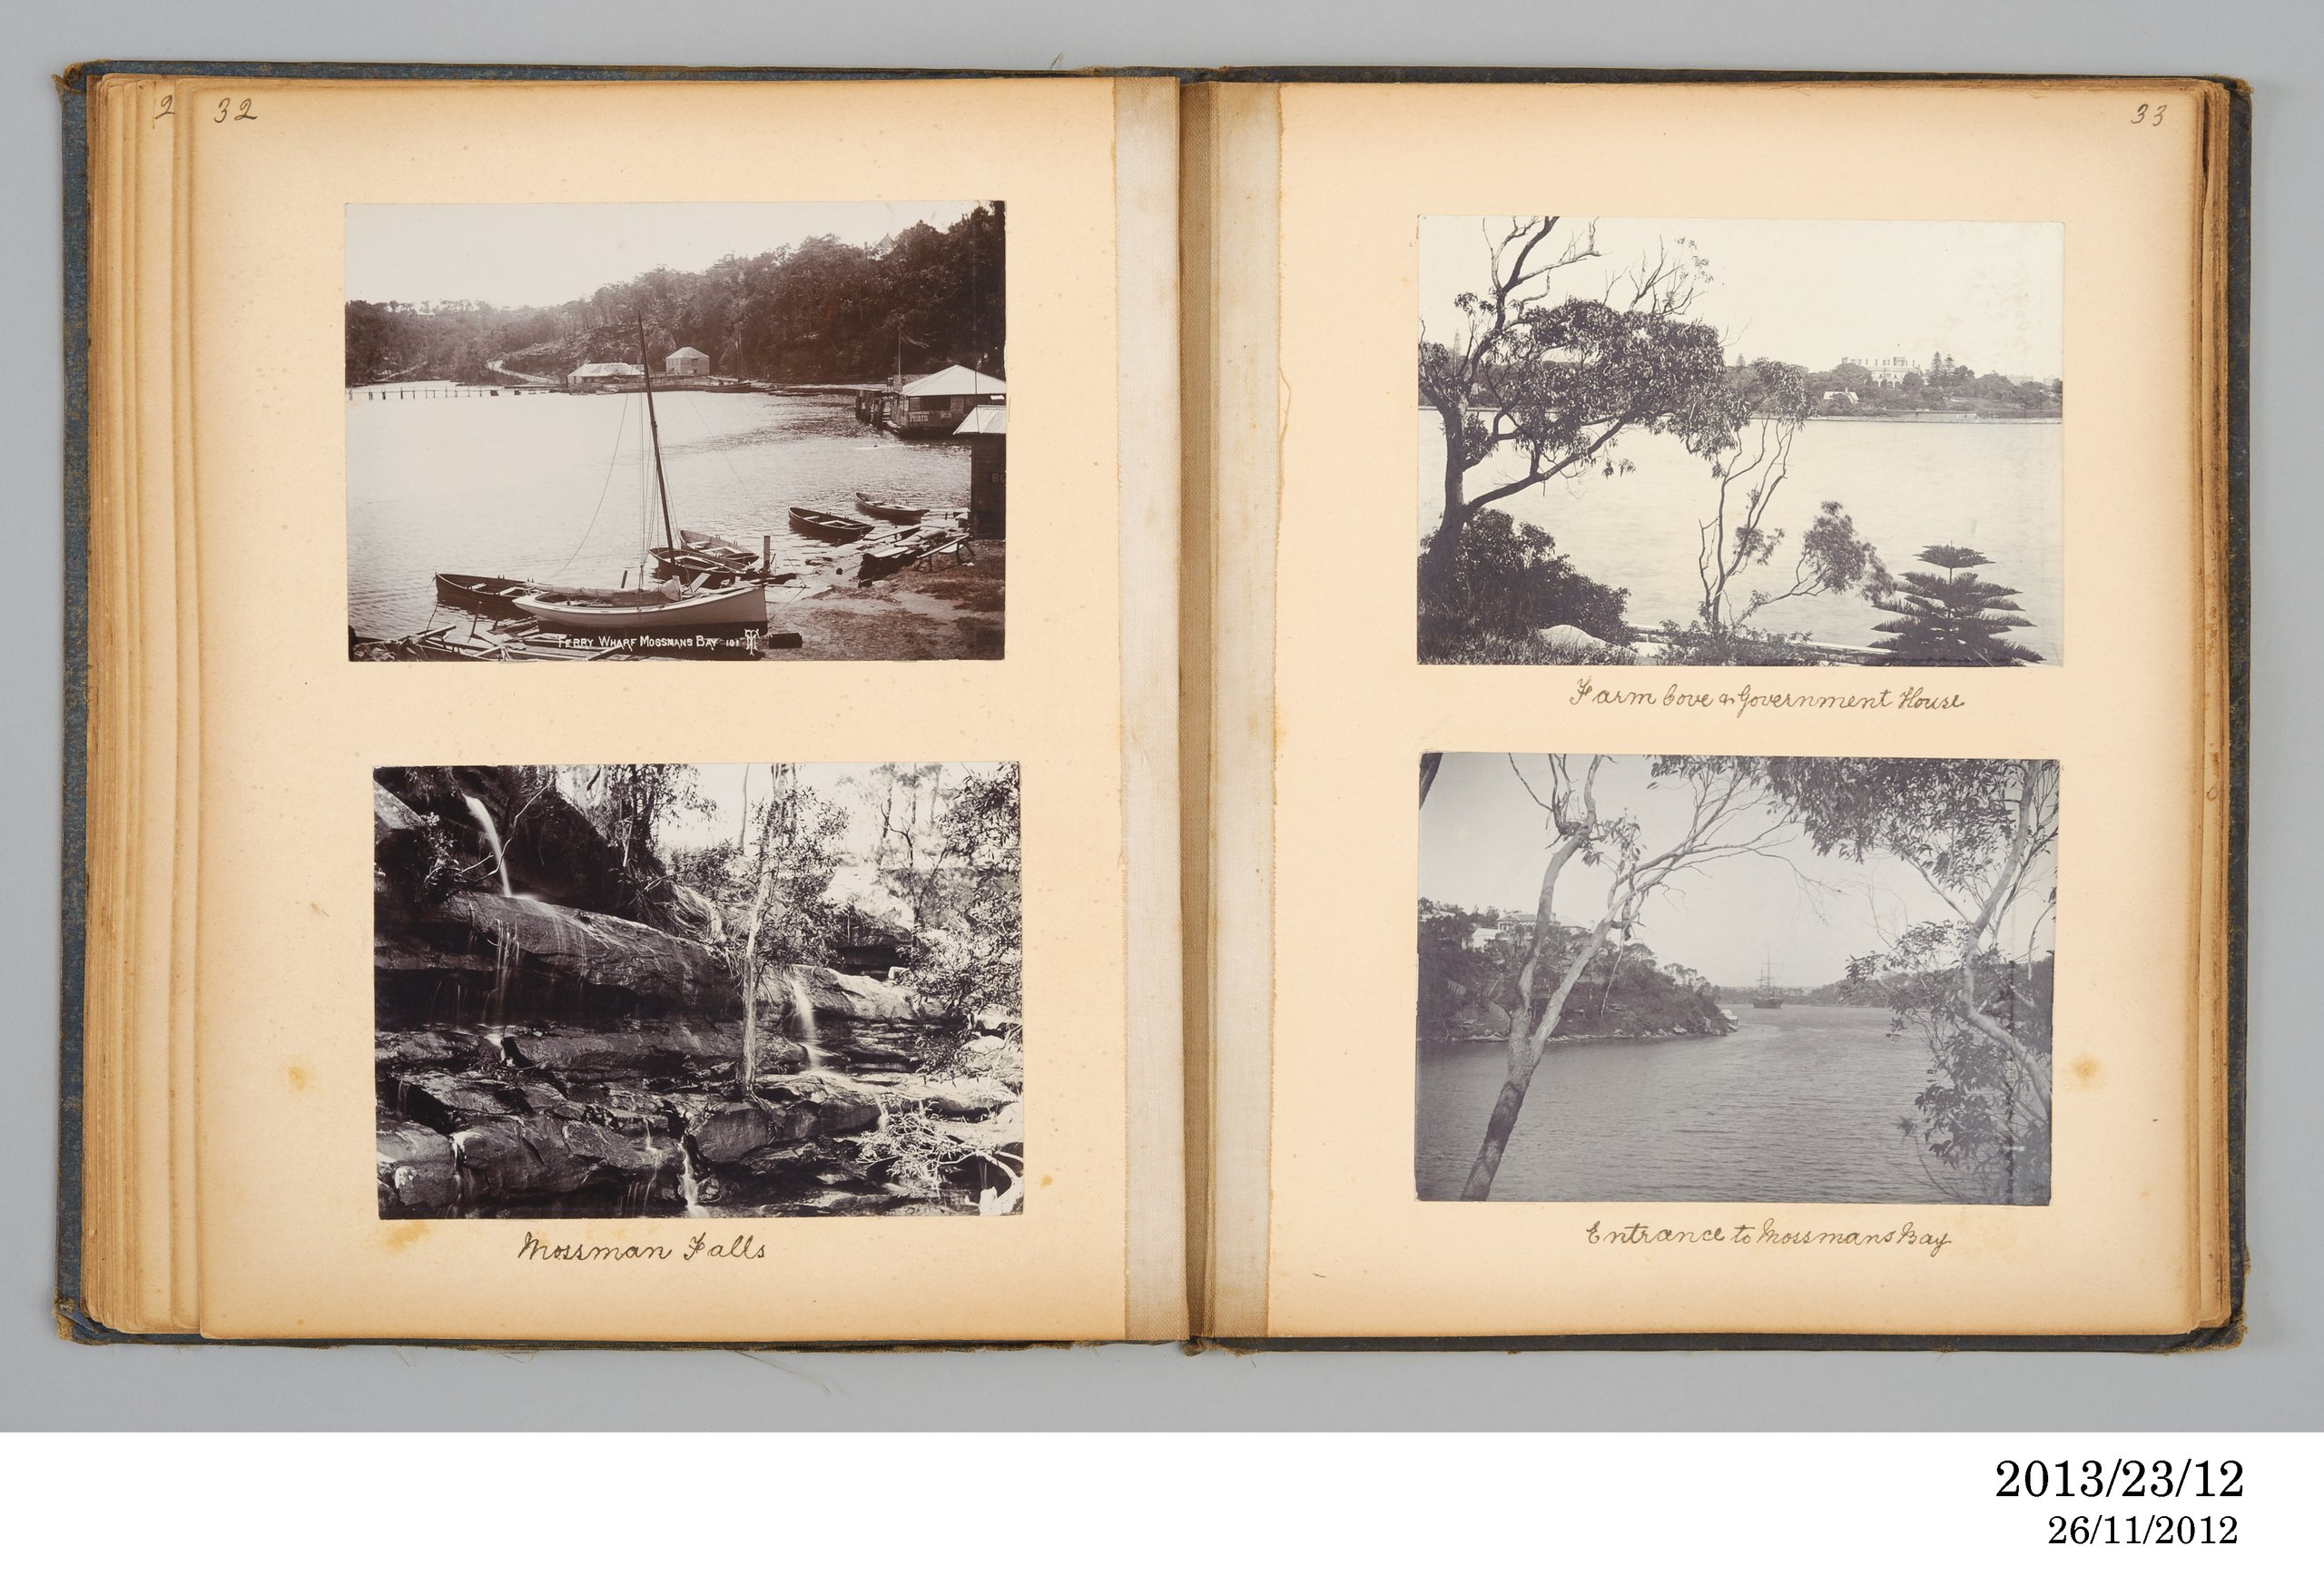 Photographic album of outdoor views owned by Emily C Marsh